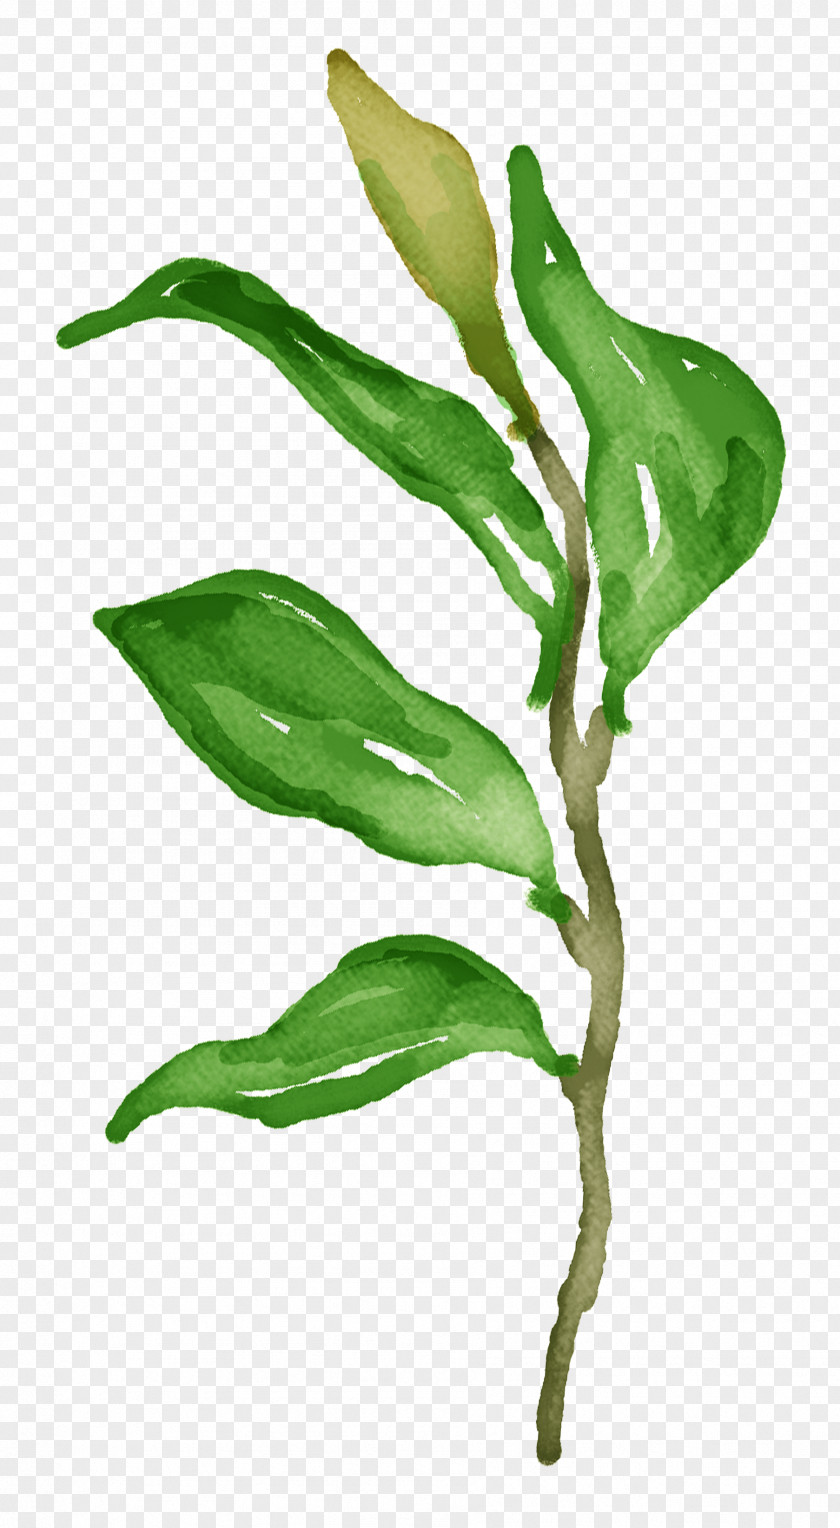 Hand-painted Grass Leaf Green Illustration PNG